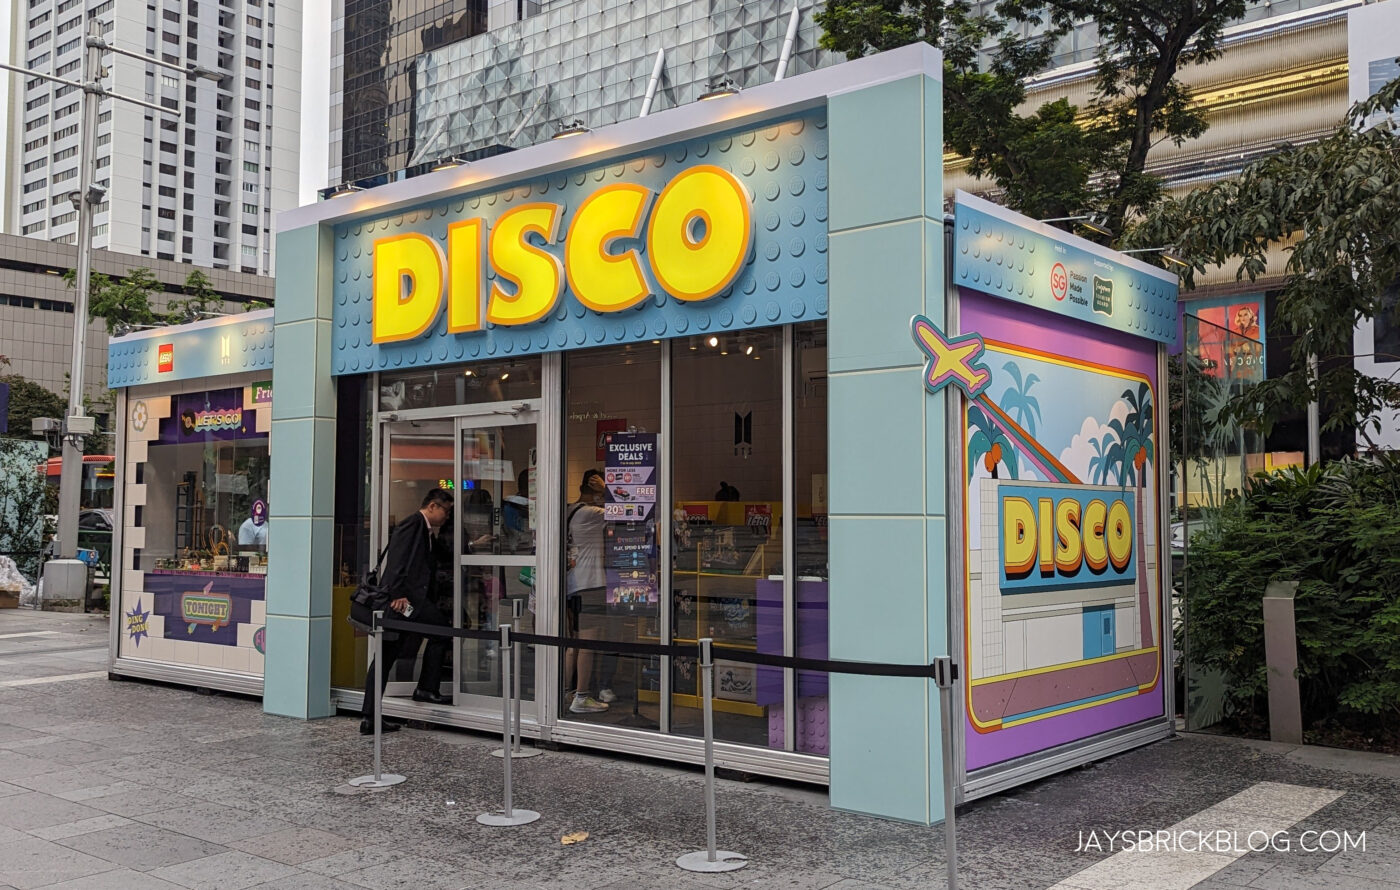 Here’s a look at the LEGO BTS Dynamite Pop-up at Orchard Road, Singapore45